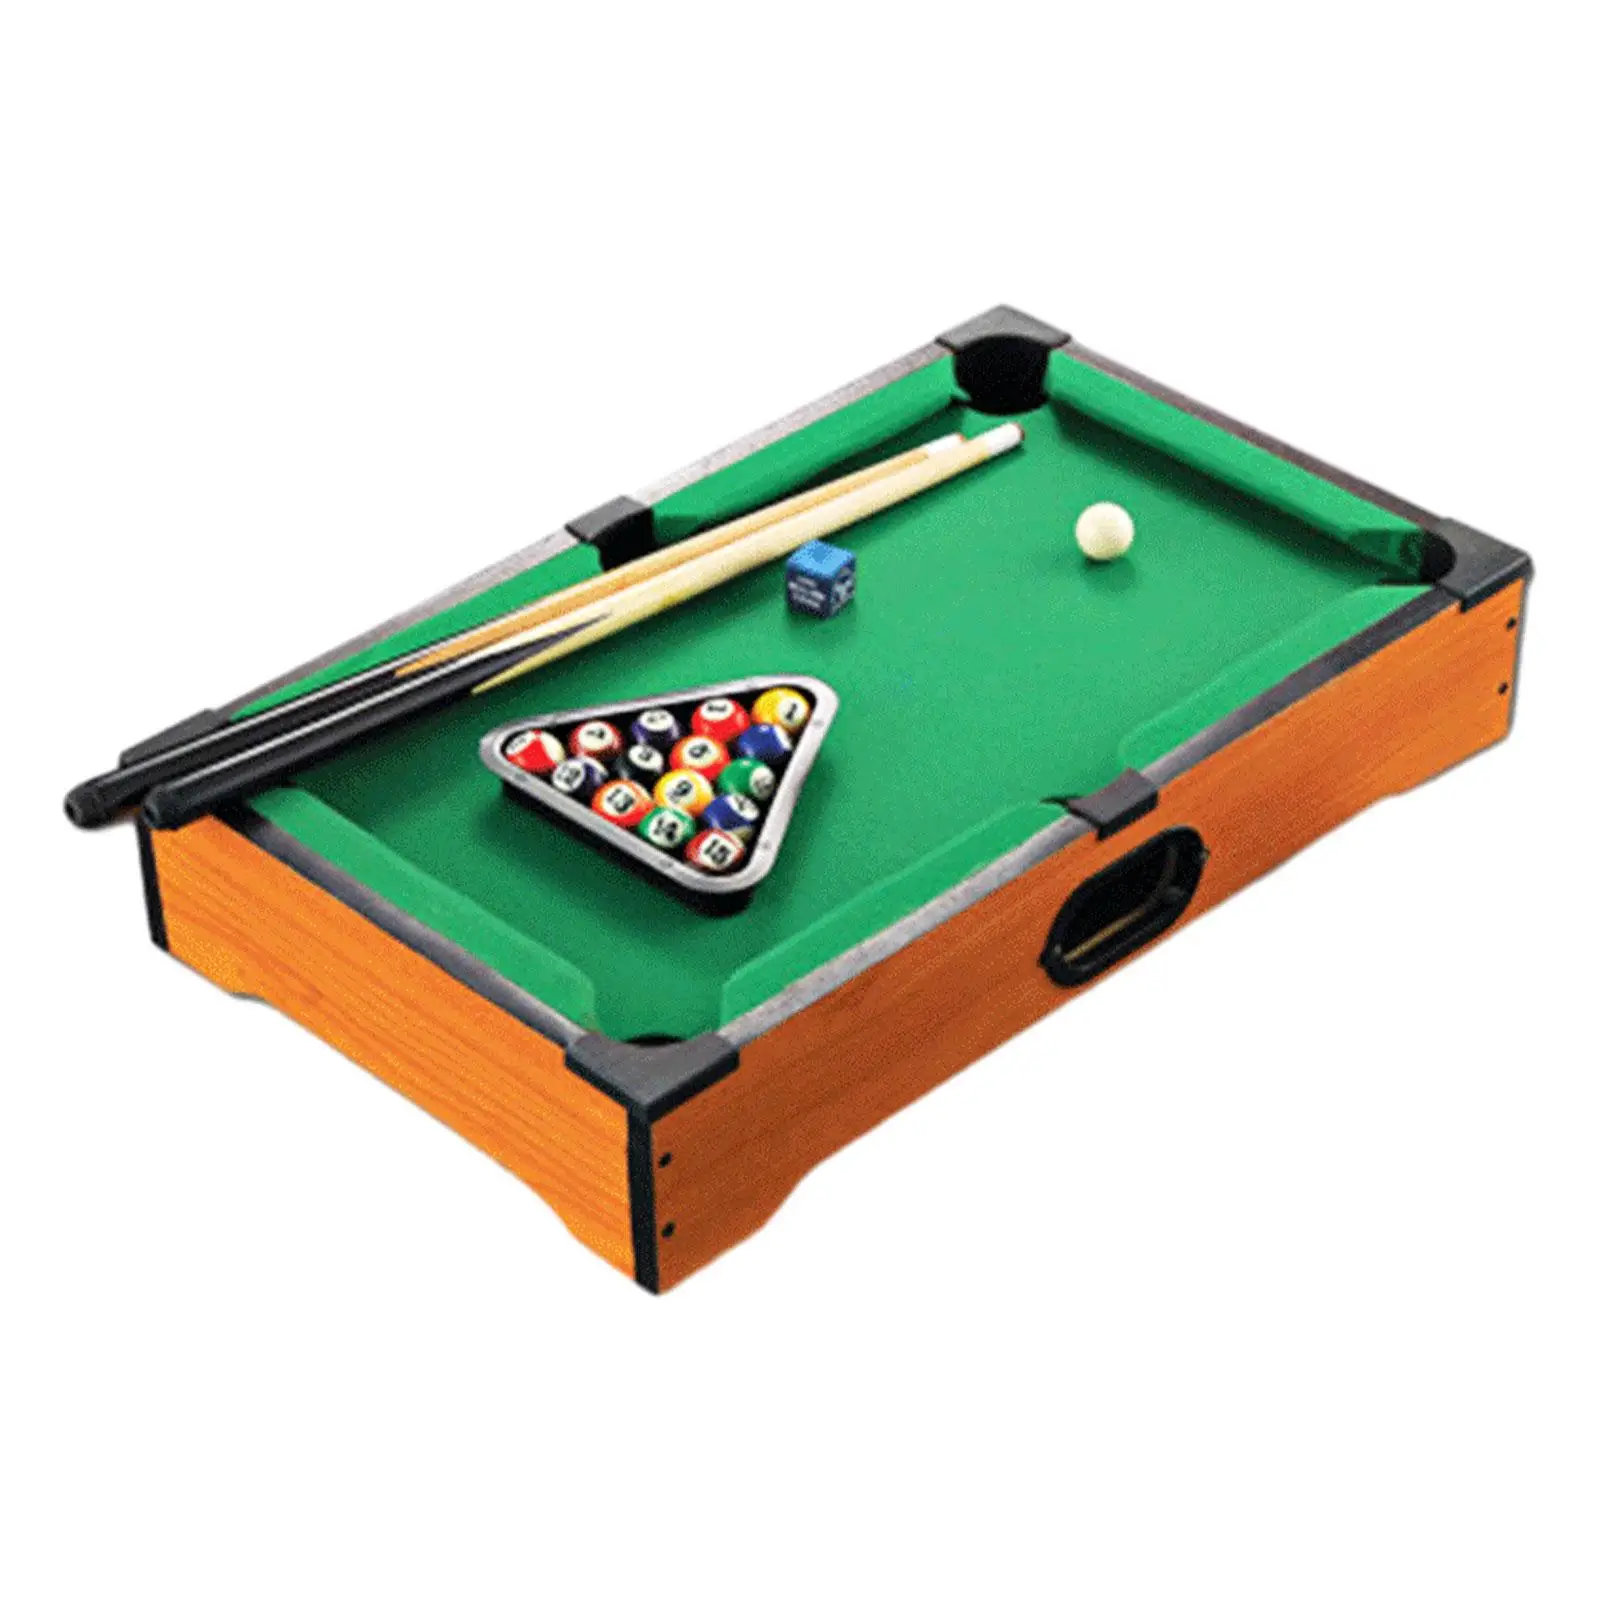 Table Snooker Eye Hand Coordination Cues Wooden Billiards Playset for Travel Desktop Living Room Playhouse Adults